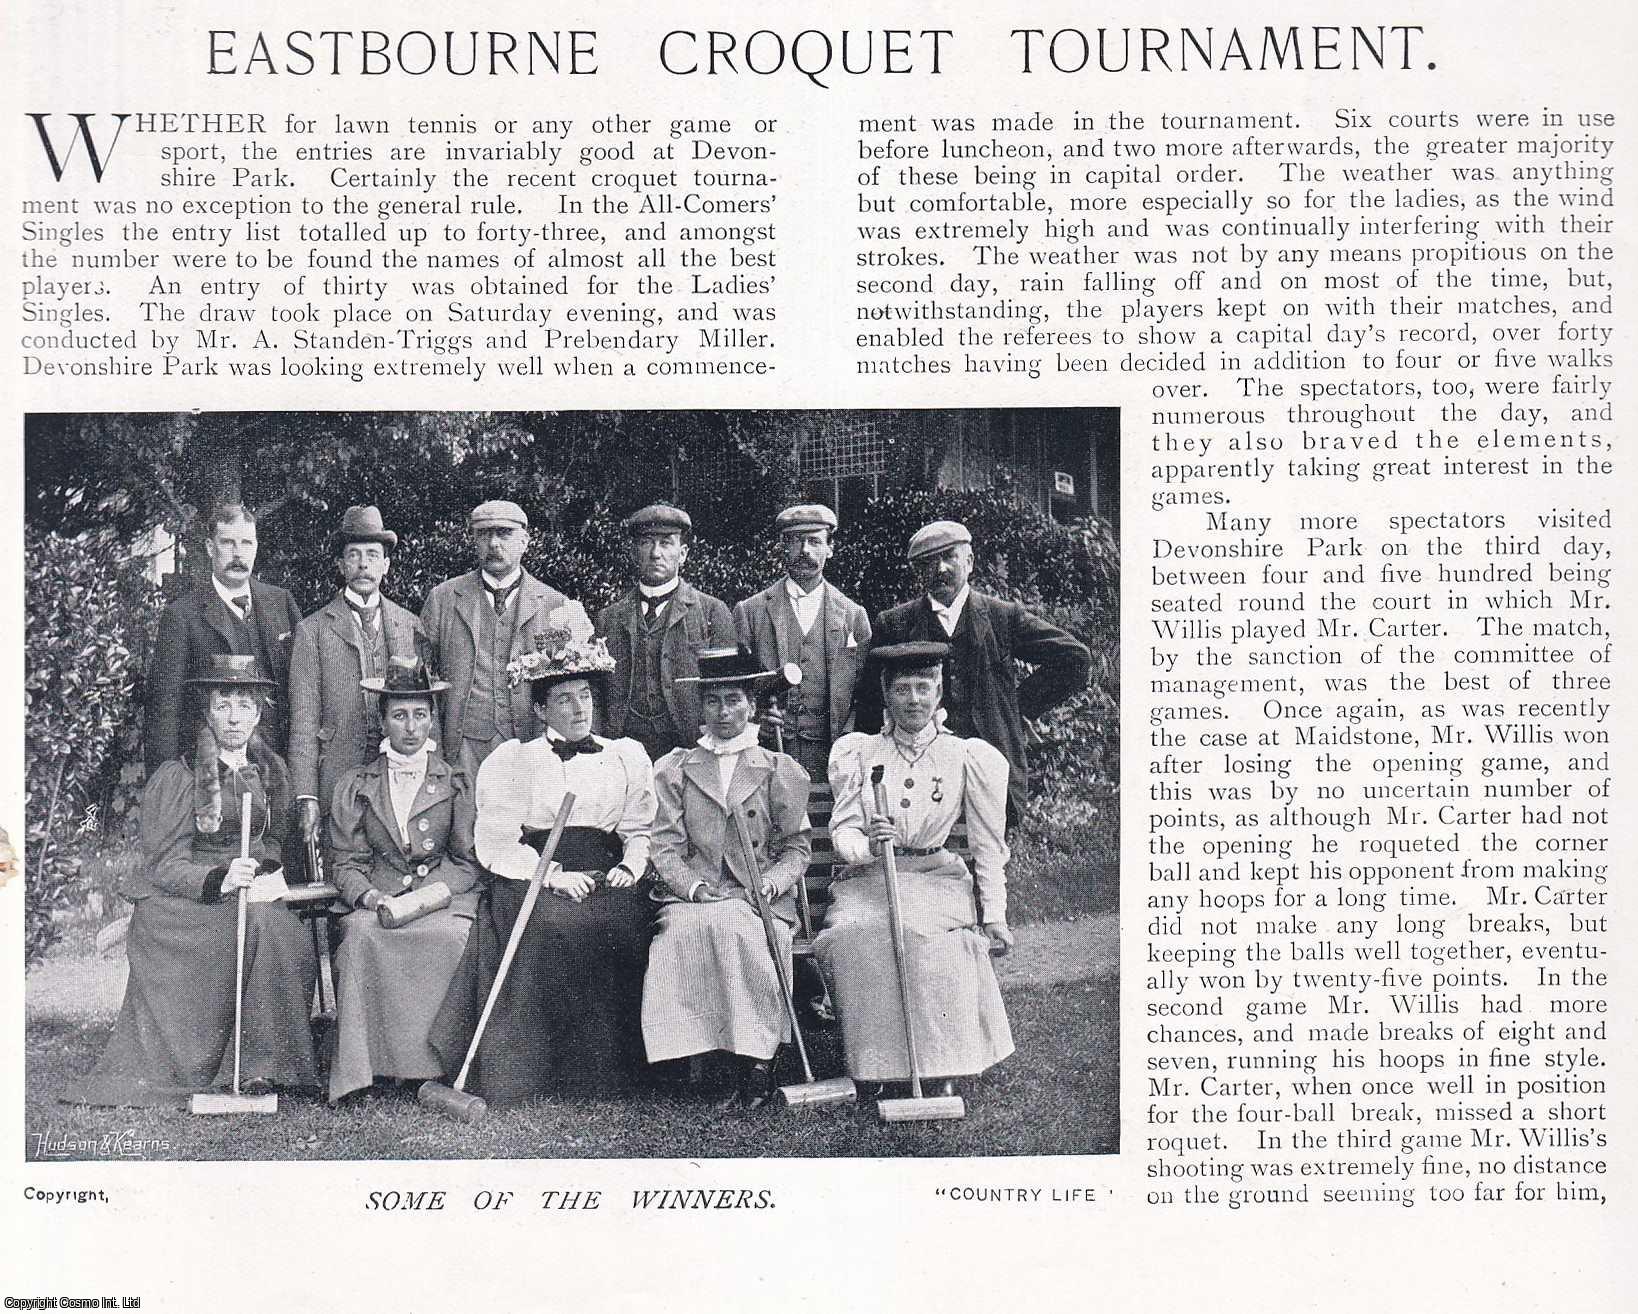 COUNTRY LIFE - Eastbourne Croquet Tournament. Several pictures and accompanying text, removed from an original issue of Country Life Magazine, 1897.